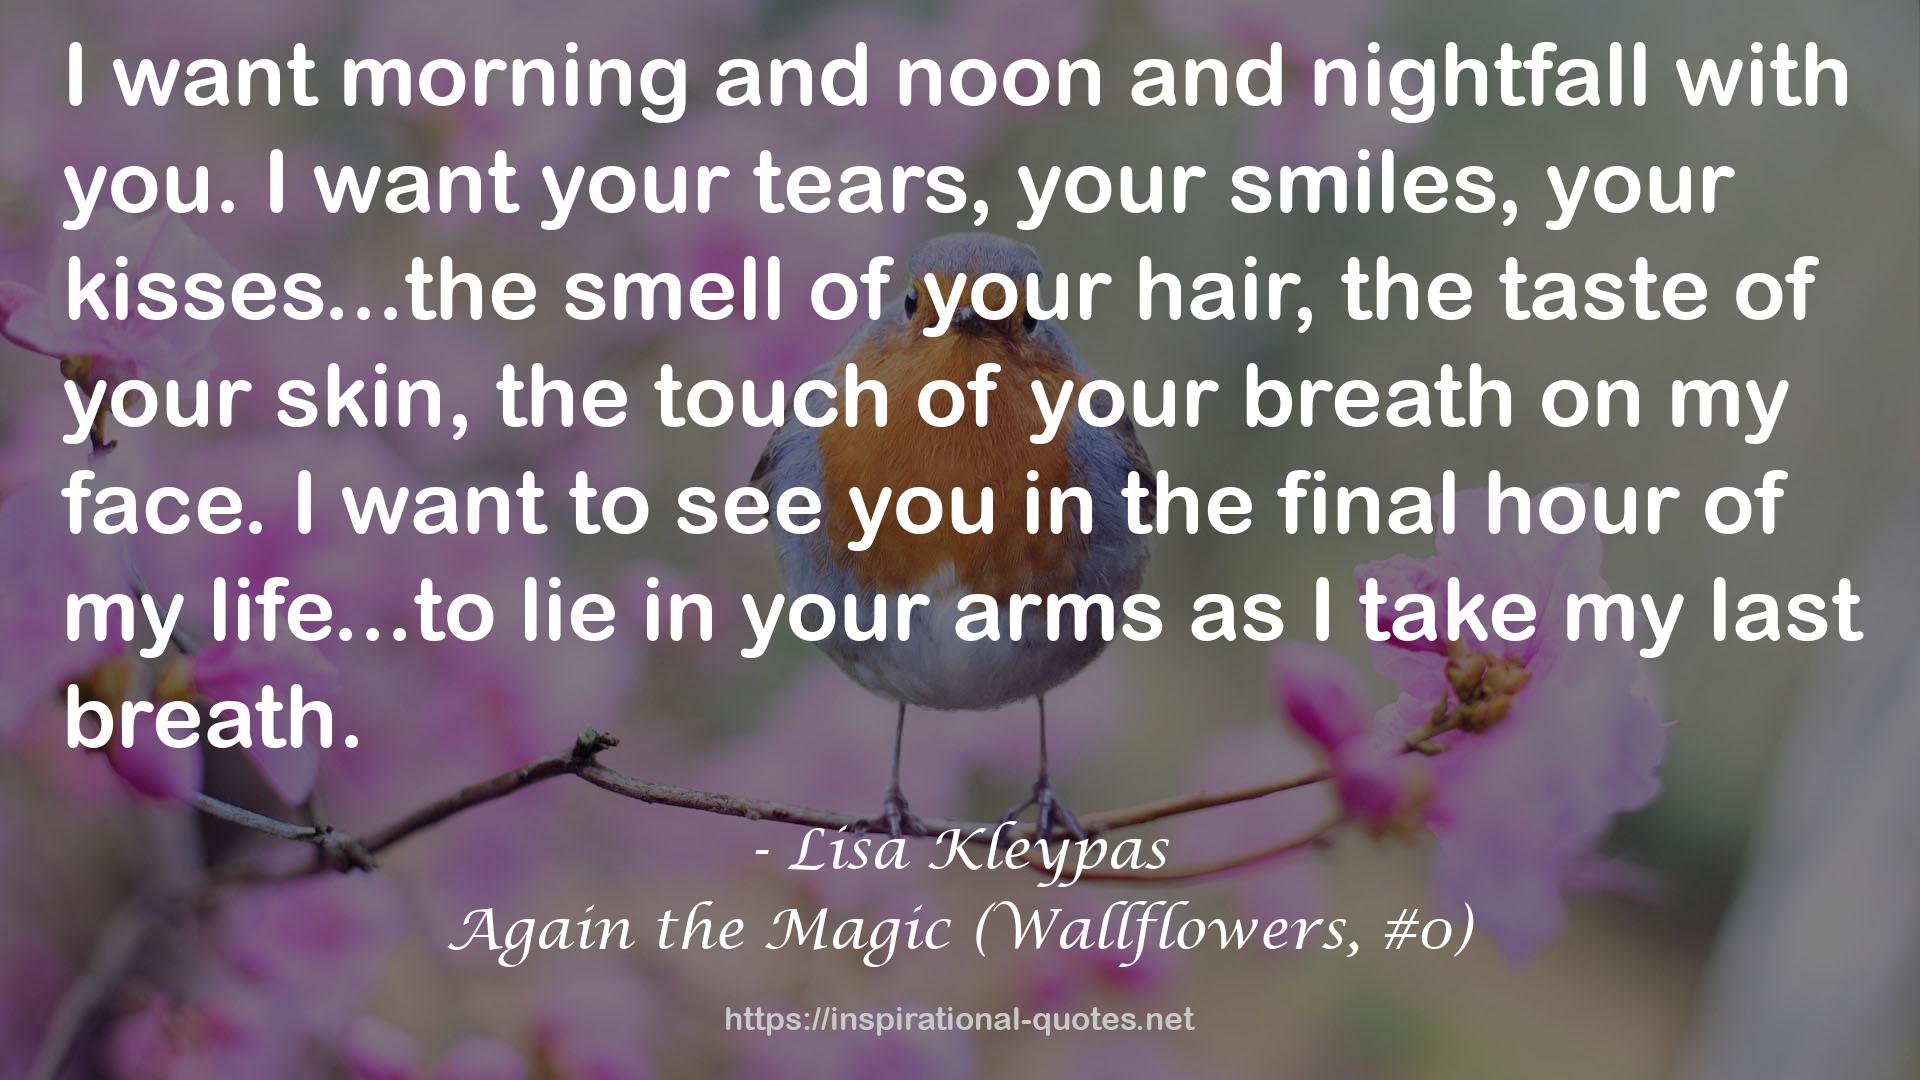 Again the Magic (Wallflowers, #0) QUOTES